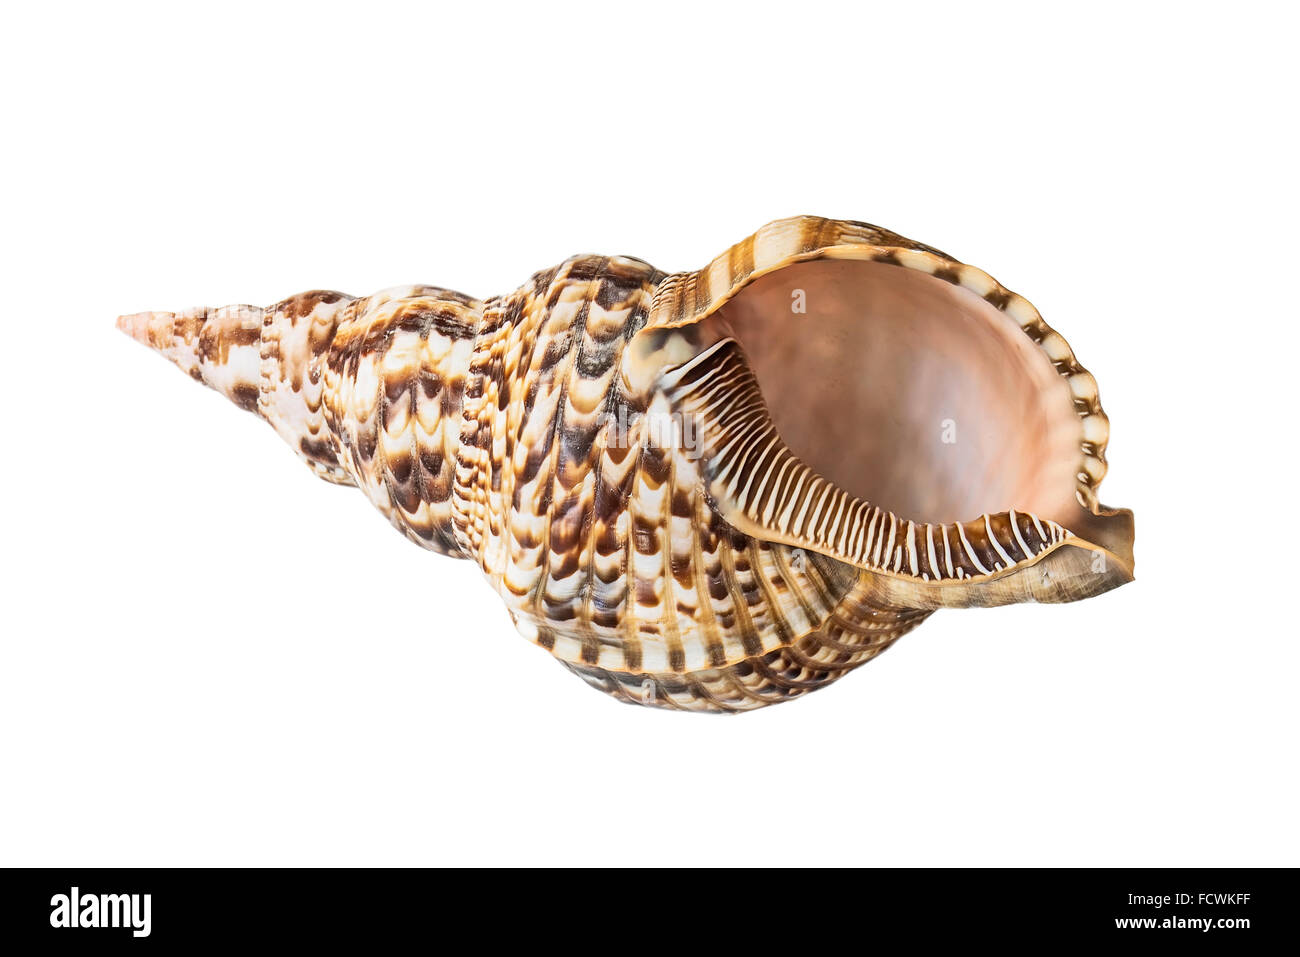 Shell, Conch Shell, Queen Conch. Isolated on white. Stock Photo